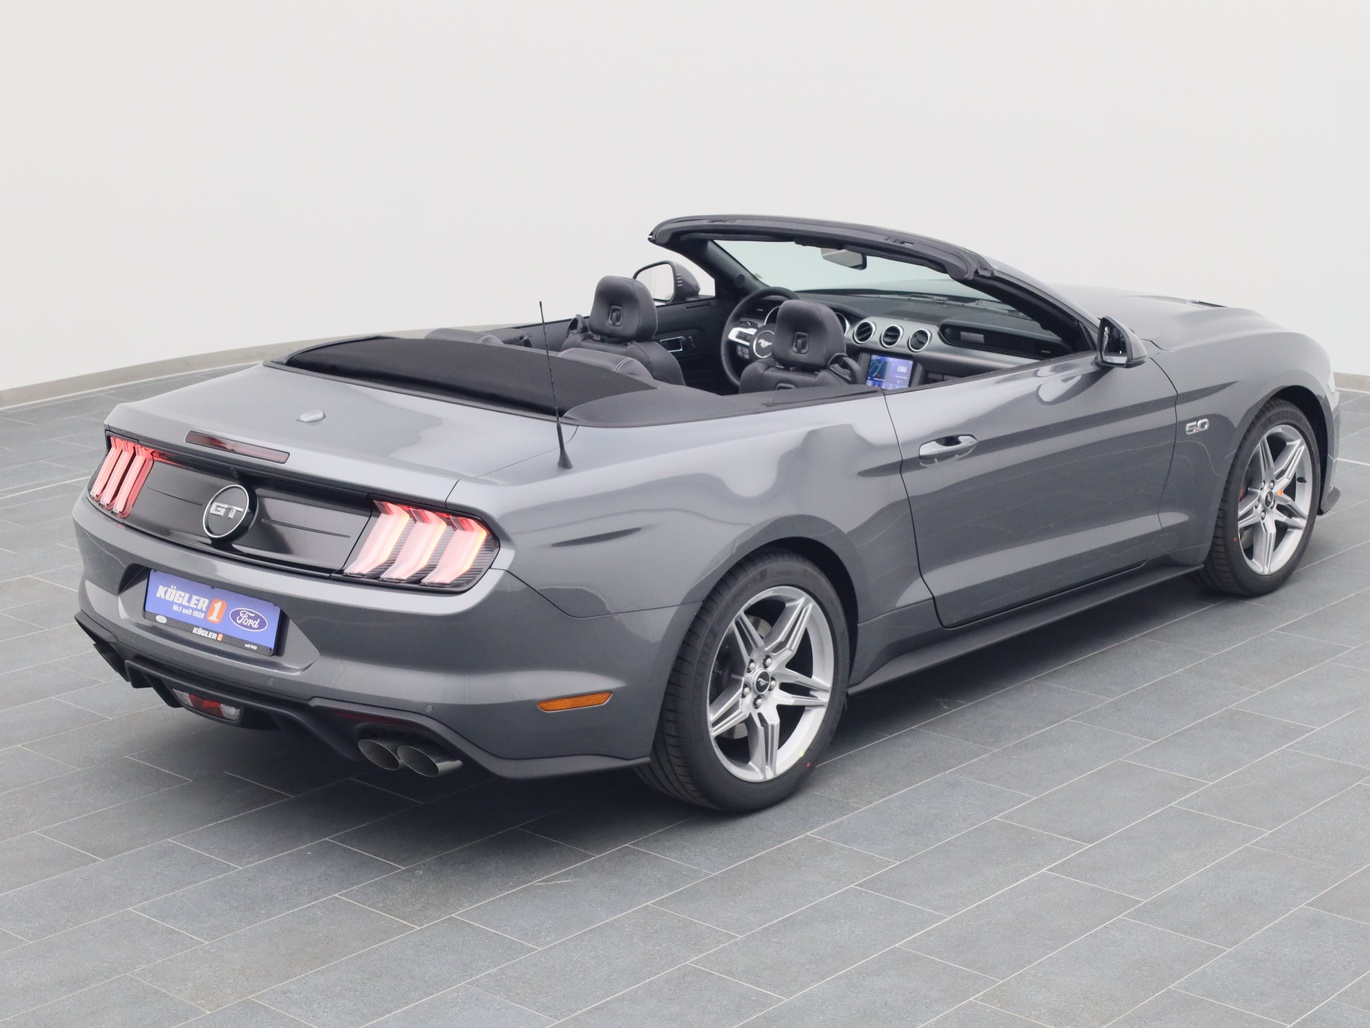  Ford Mustang GT Cabrio V8 450PS / Premium 4 in Carbonized Gray 